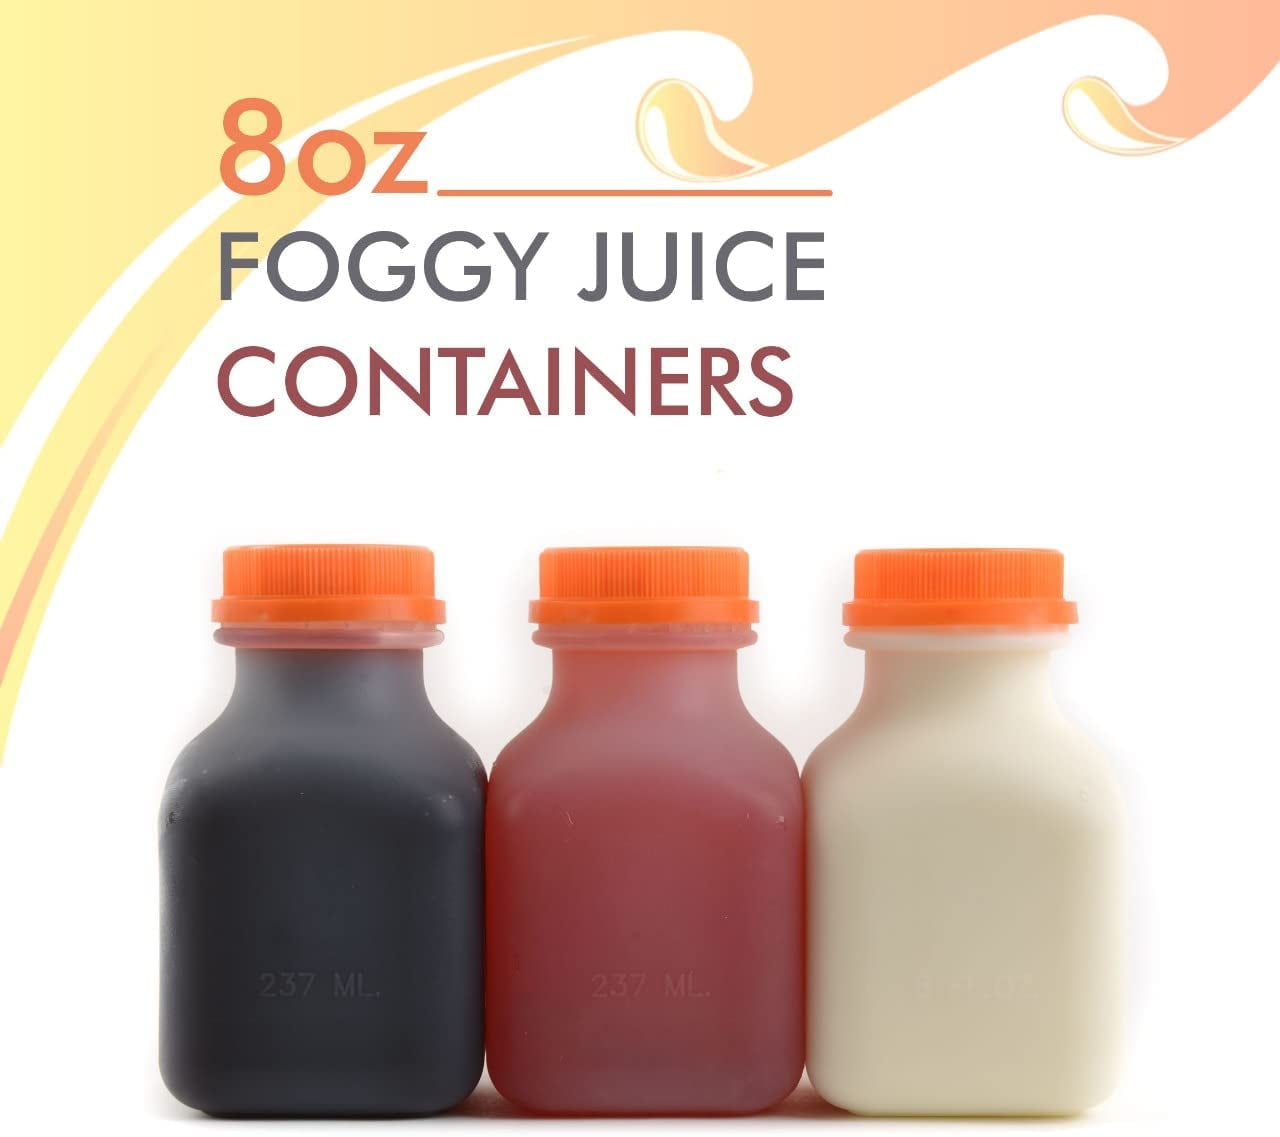 [200 PACK] 12 oz Empty Plastic Juice Bottles with Tamper Evident Caps -  Smoothie Bottles - Ideal for Juices, Milk, Smoothies, Picnic's and even  Meal